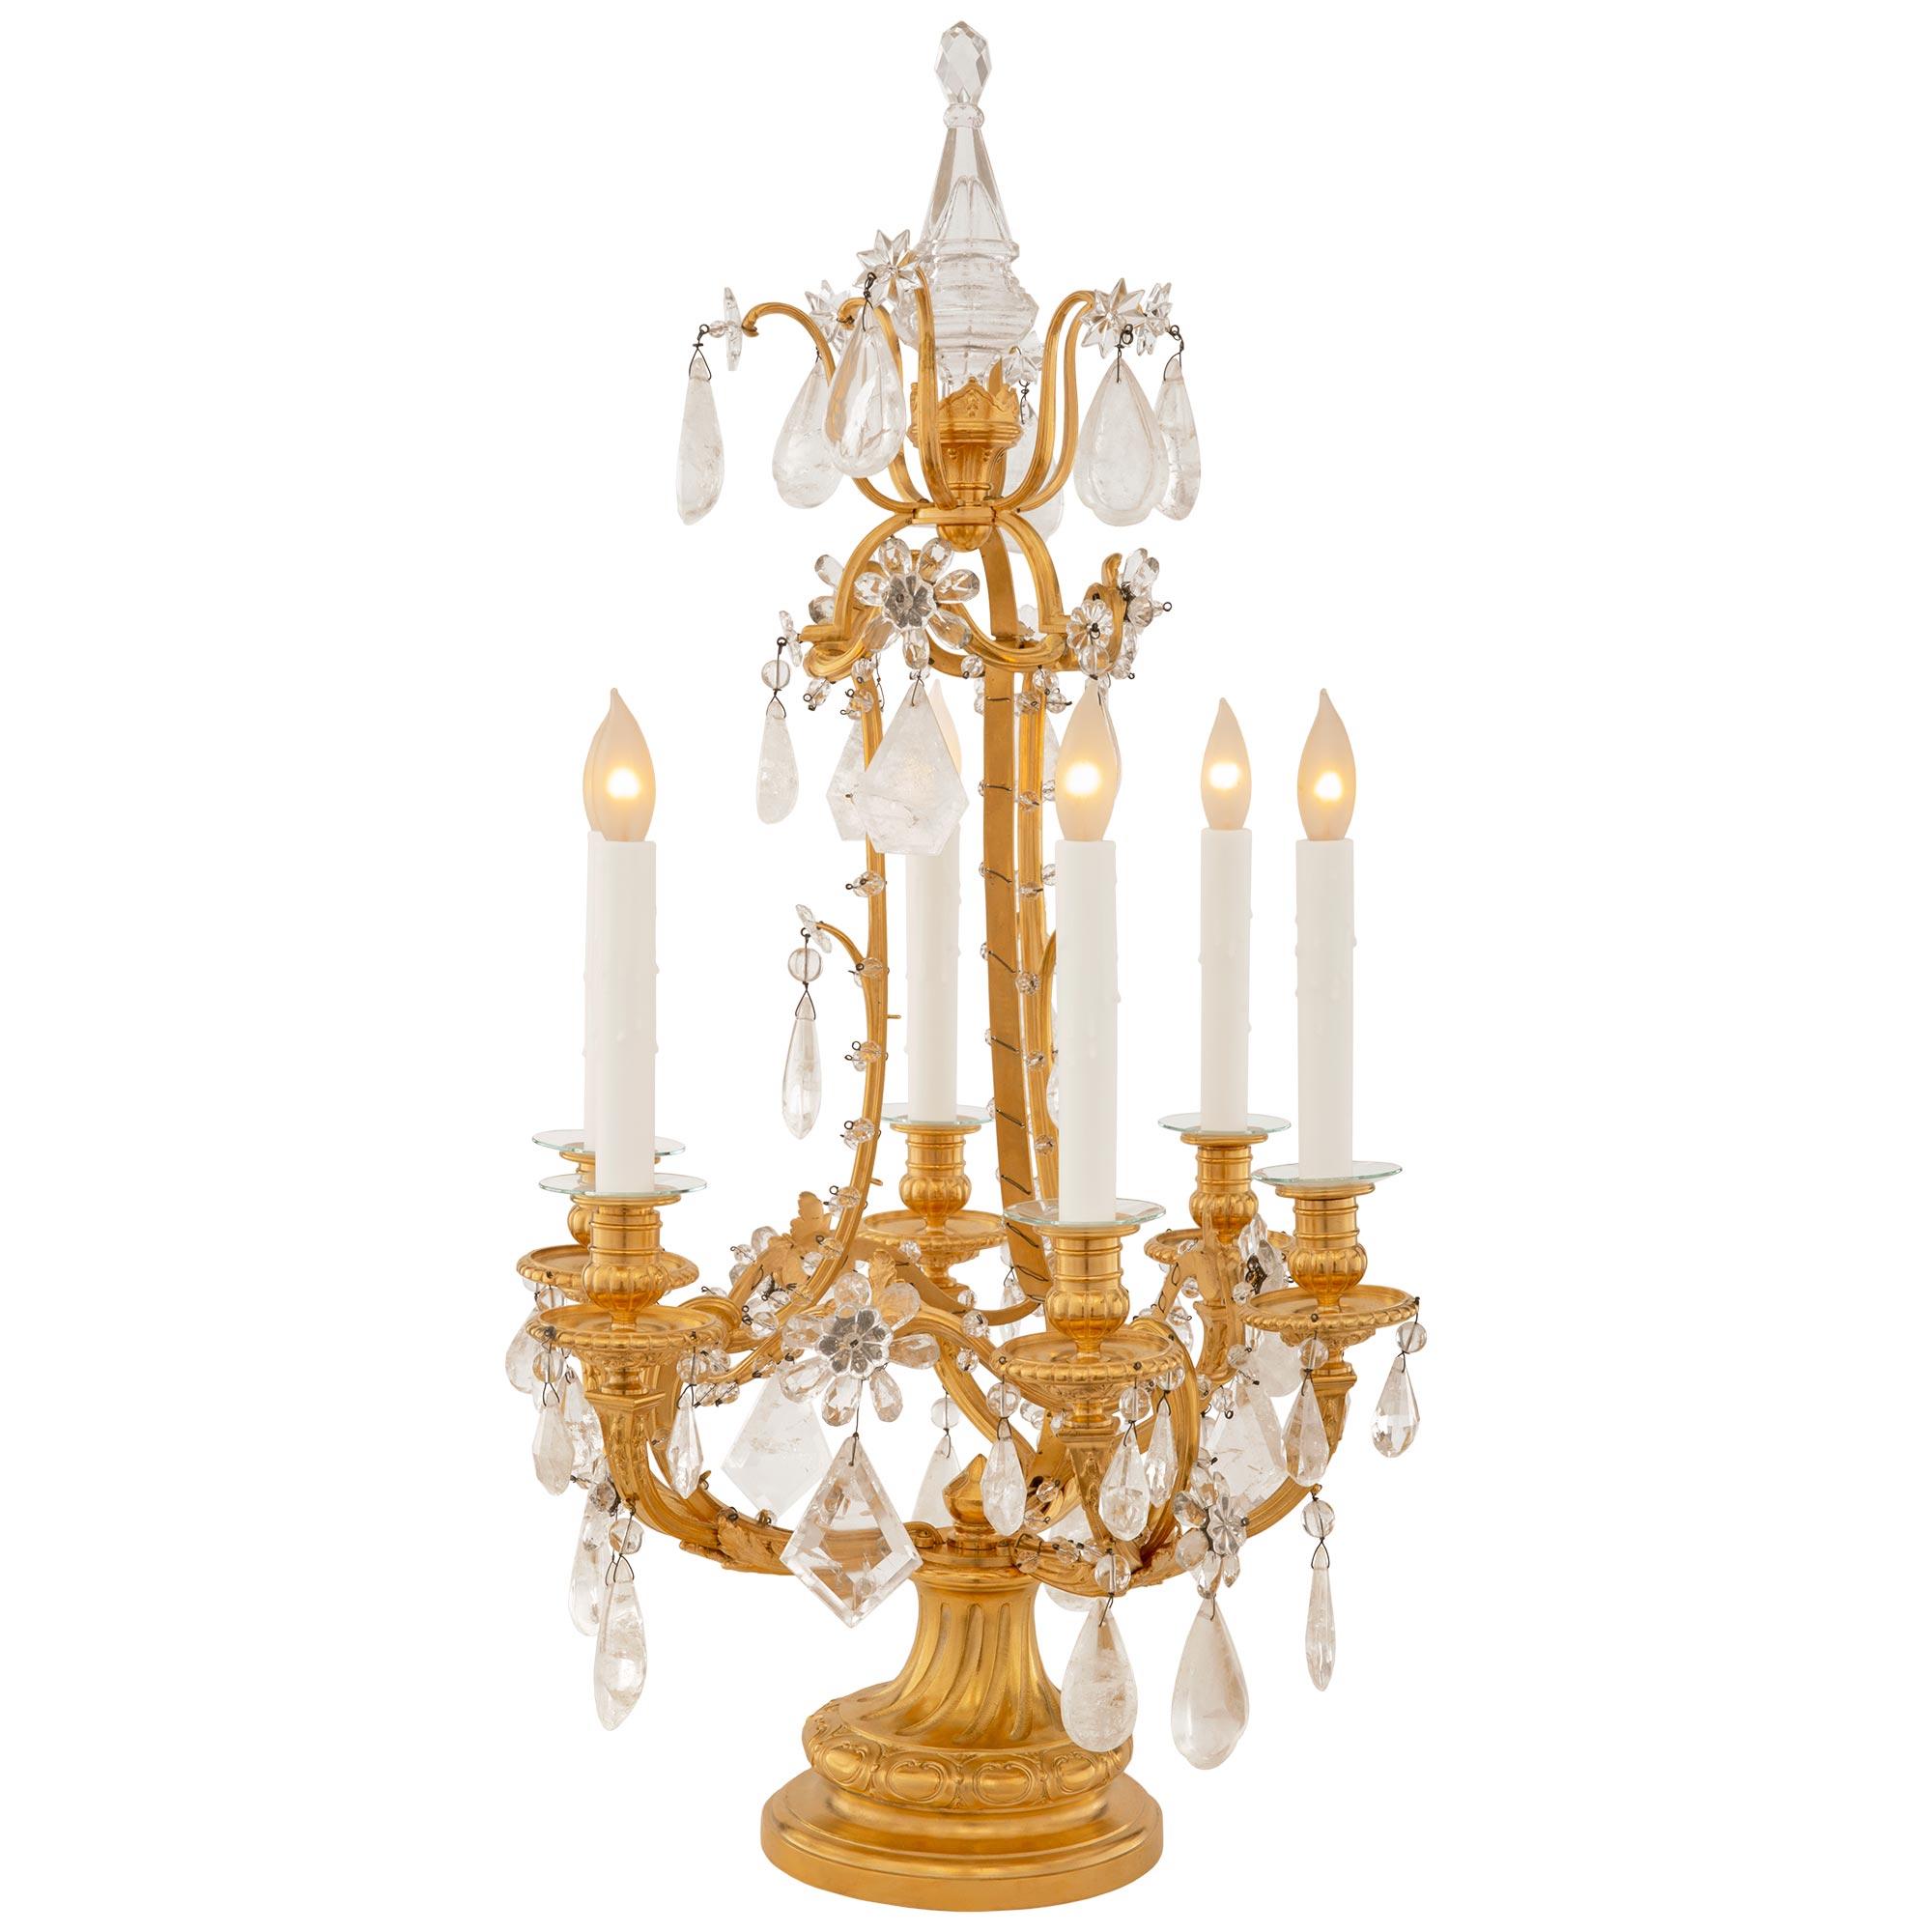 A stunning and highly quality pair of French 19th century Louis XVI st. Rock Crystal and Crystal Girandole lamps. Each six light Girandole is raised by a circular Ormolu base with a mottled edge below the lightly spiraling fluted socle pedestal with